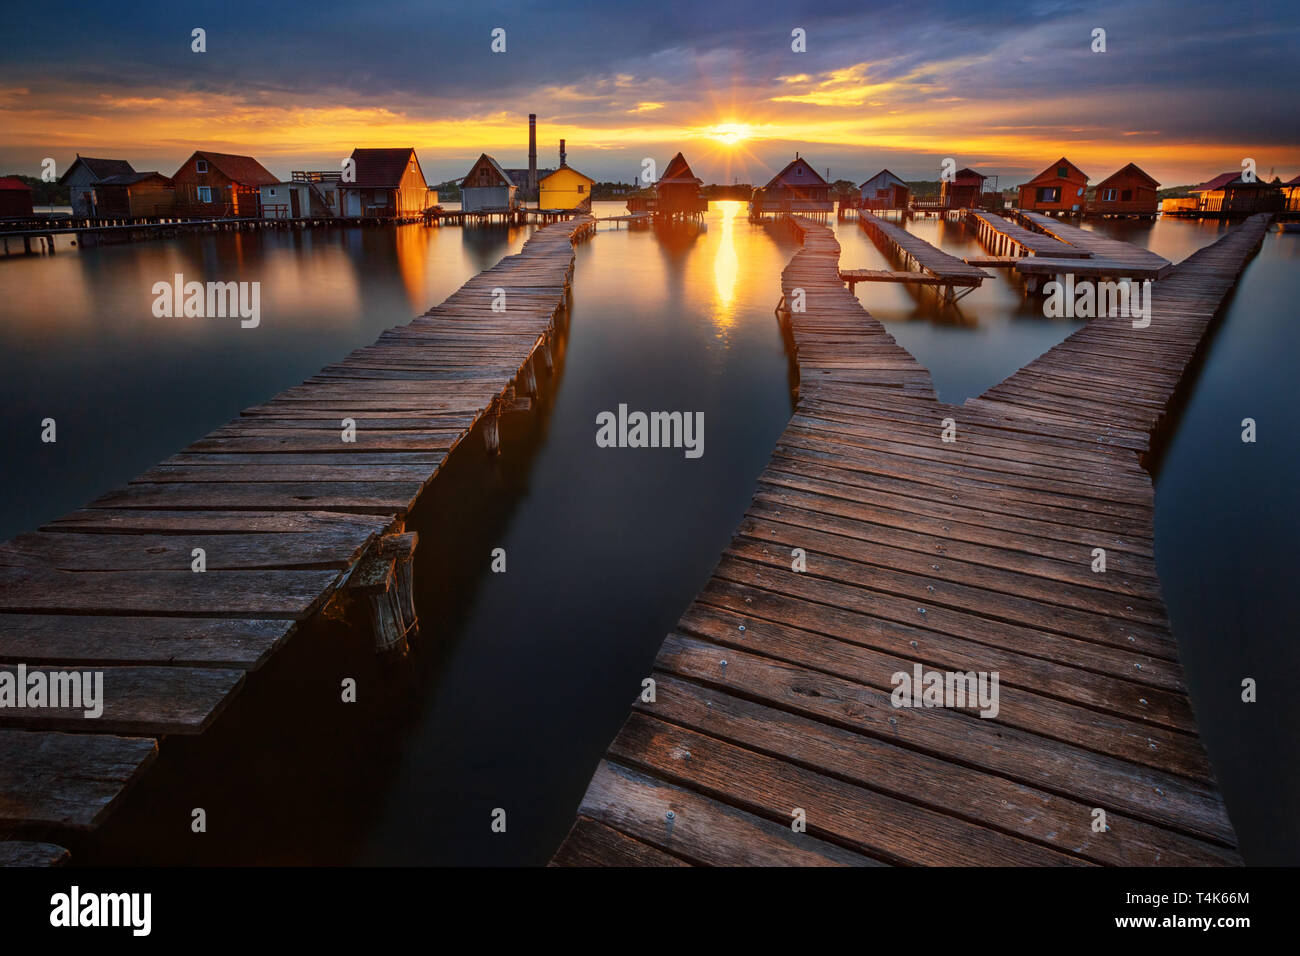 Sunset over lake Bokod with wooden pier and floating houses, Hungary Stock Photo